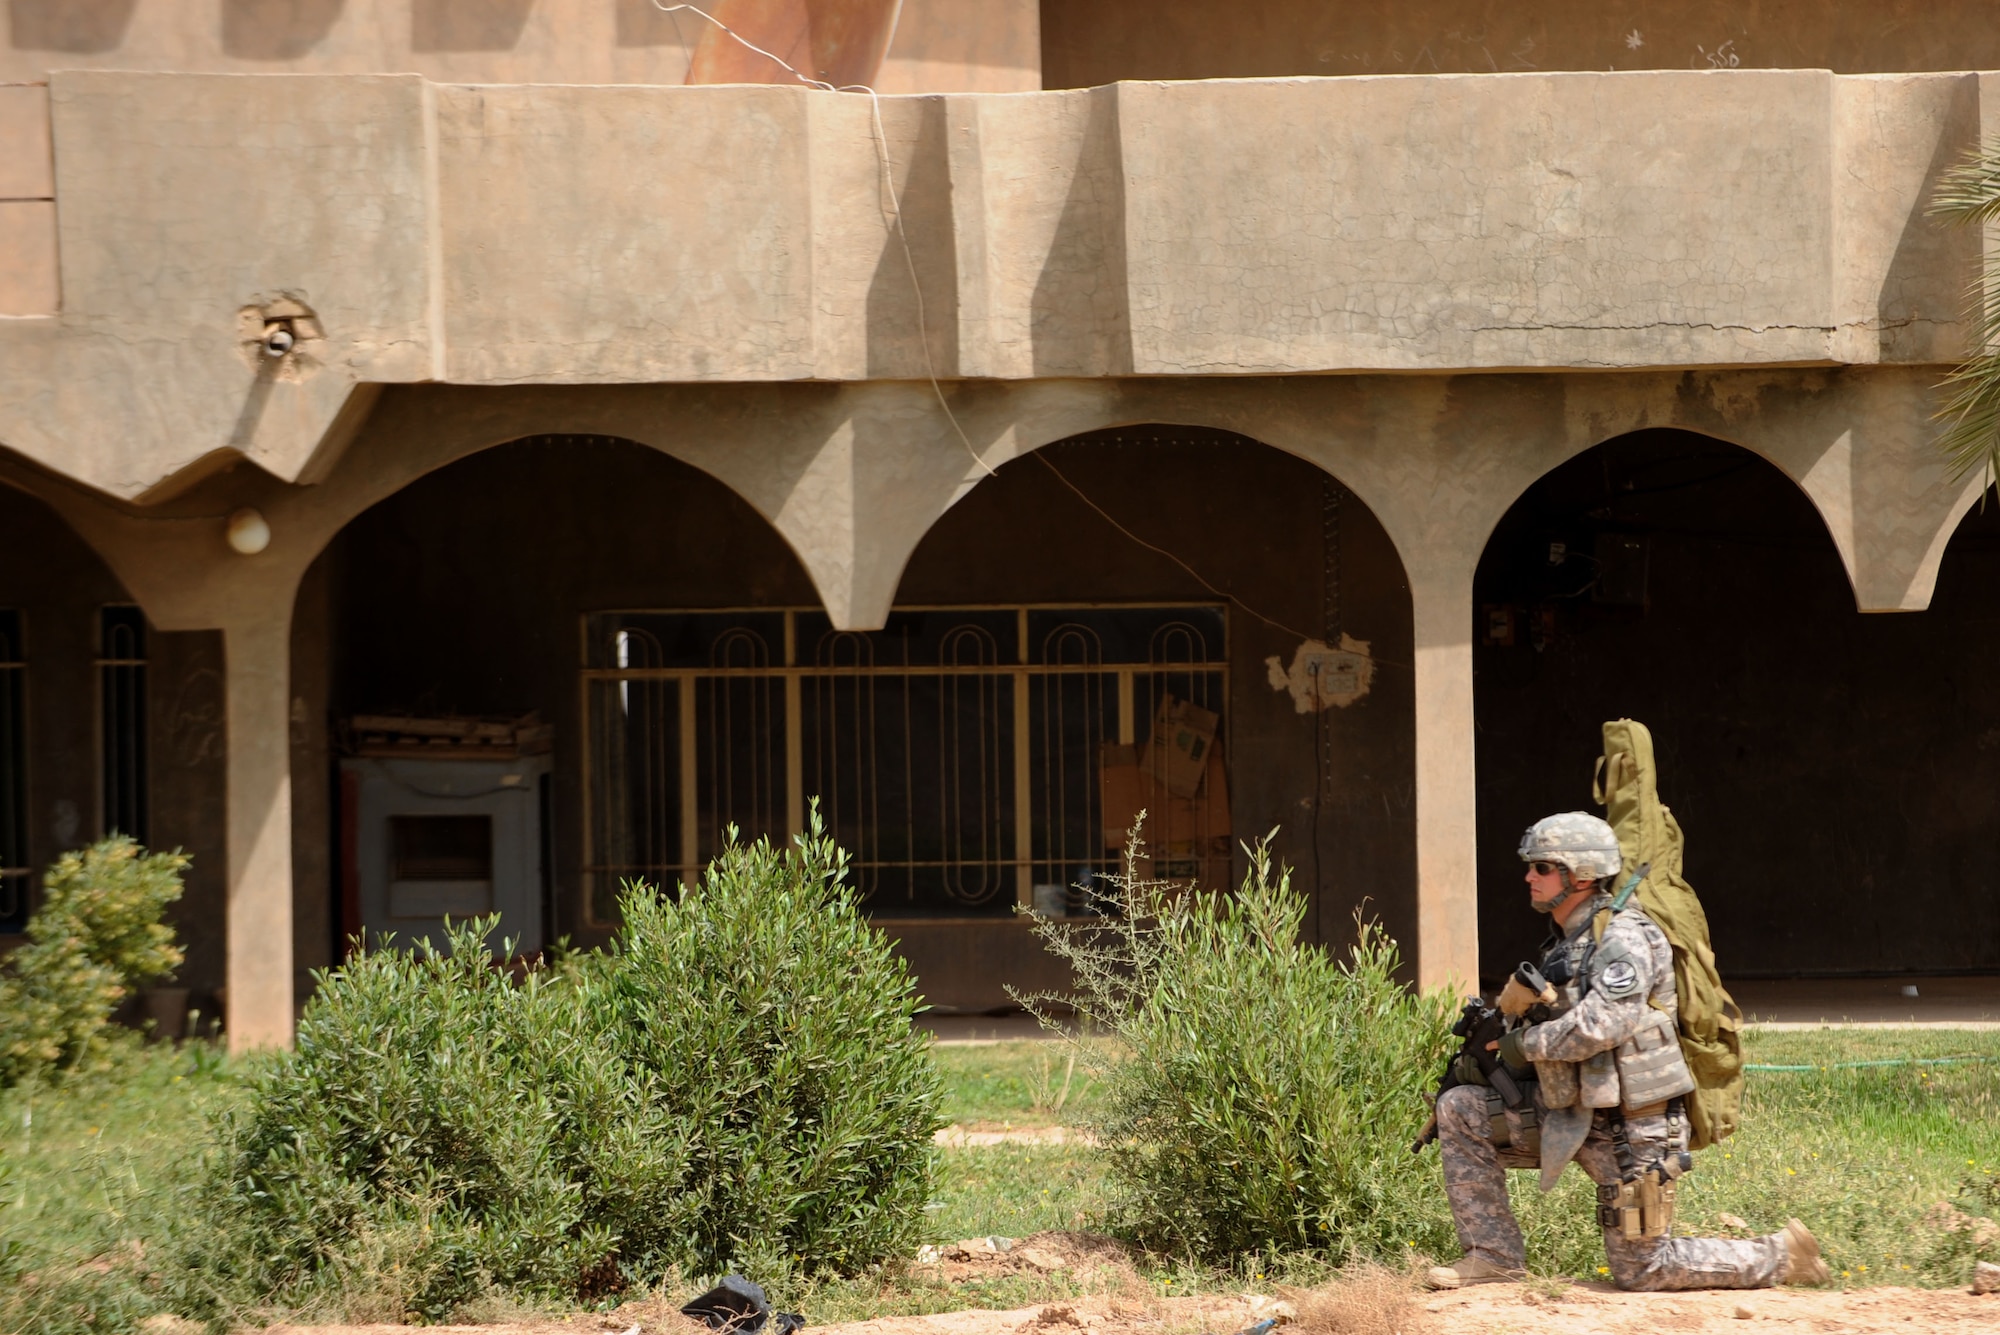 U.S. Air Force Senior Airman Brian Hafner, 532nd Security Forces Squadron, Joint Base Balad, Iraq, conducts security during a patrol in Bakr Village April 9, 2009, in support of Operation Iraqi Freedom.  (U.S. Air Force photo by Staff Sgt. James L. Harper Jr.)